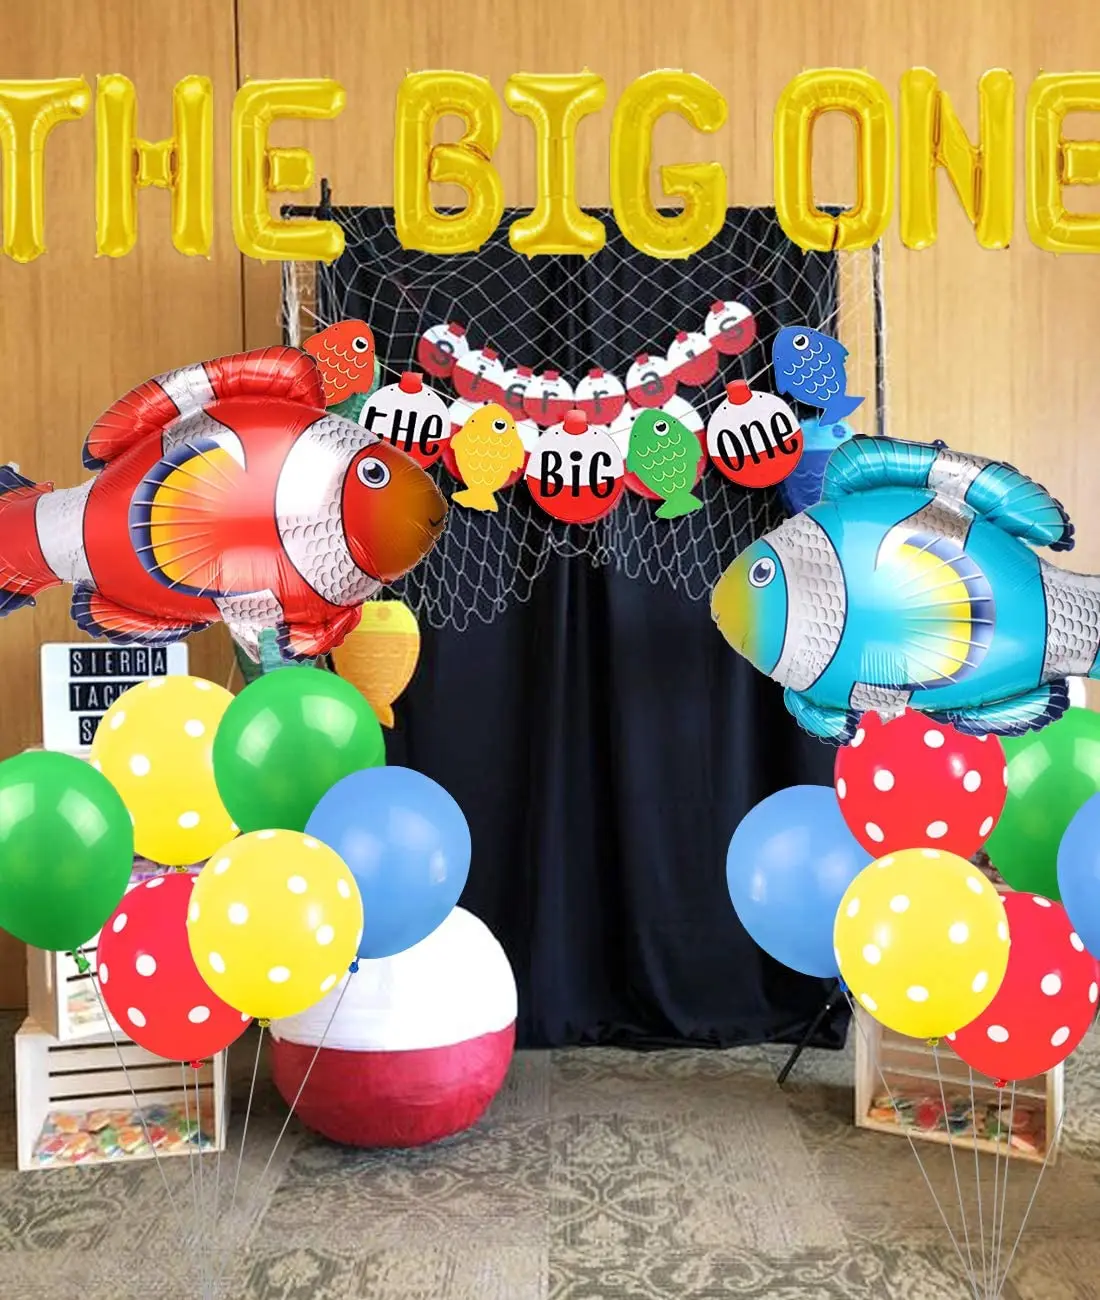 The Big One Fishing Birthday Party Supplies Little Fish Balloons 1st  Birthday Party Supplies Decorations For Kids - Ballons & Accessories -  AliExpress